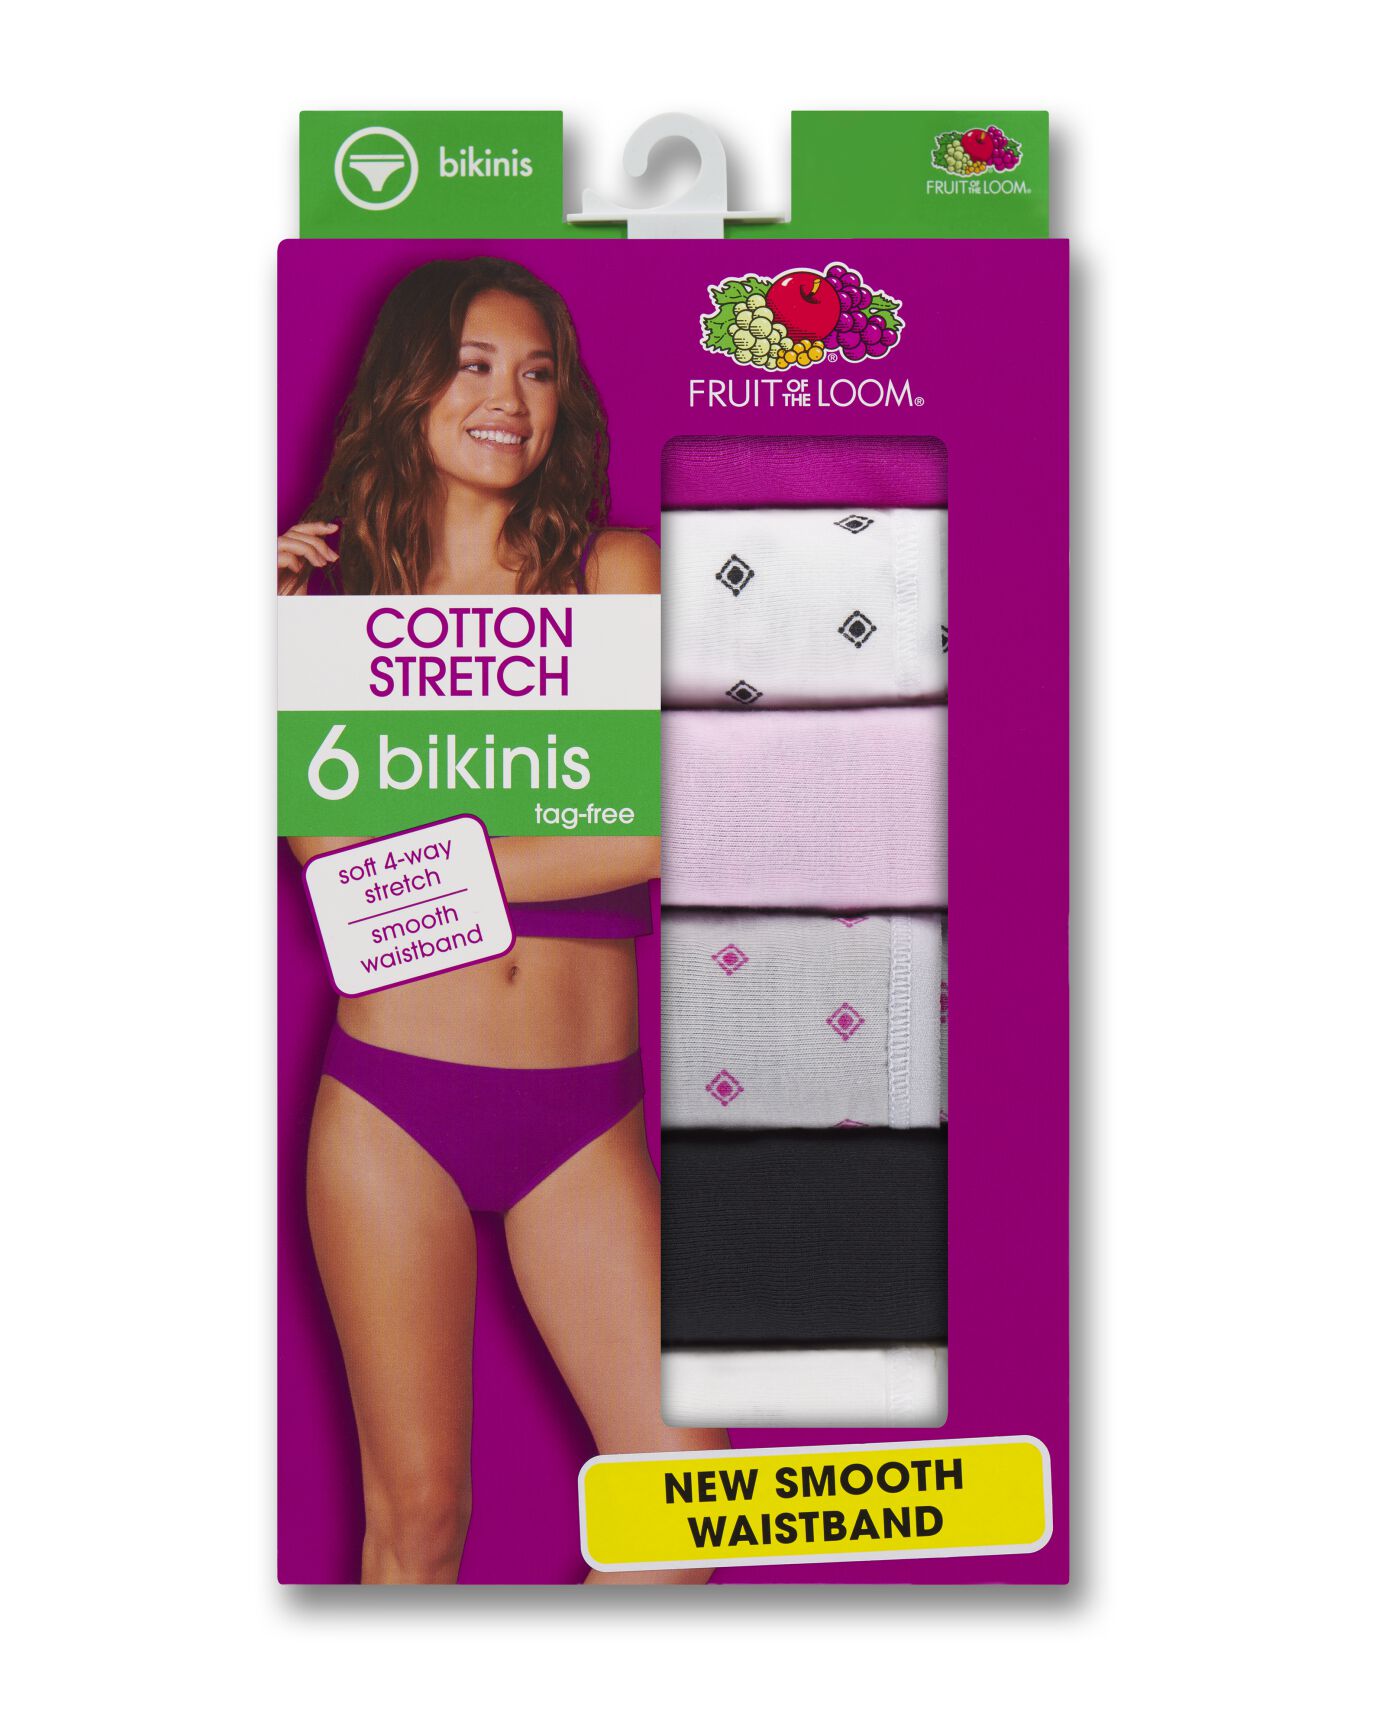 Fruit of the Loom Women's Comfort Covered Cotton Brief Underwear, 6-Pack 